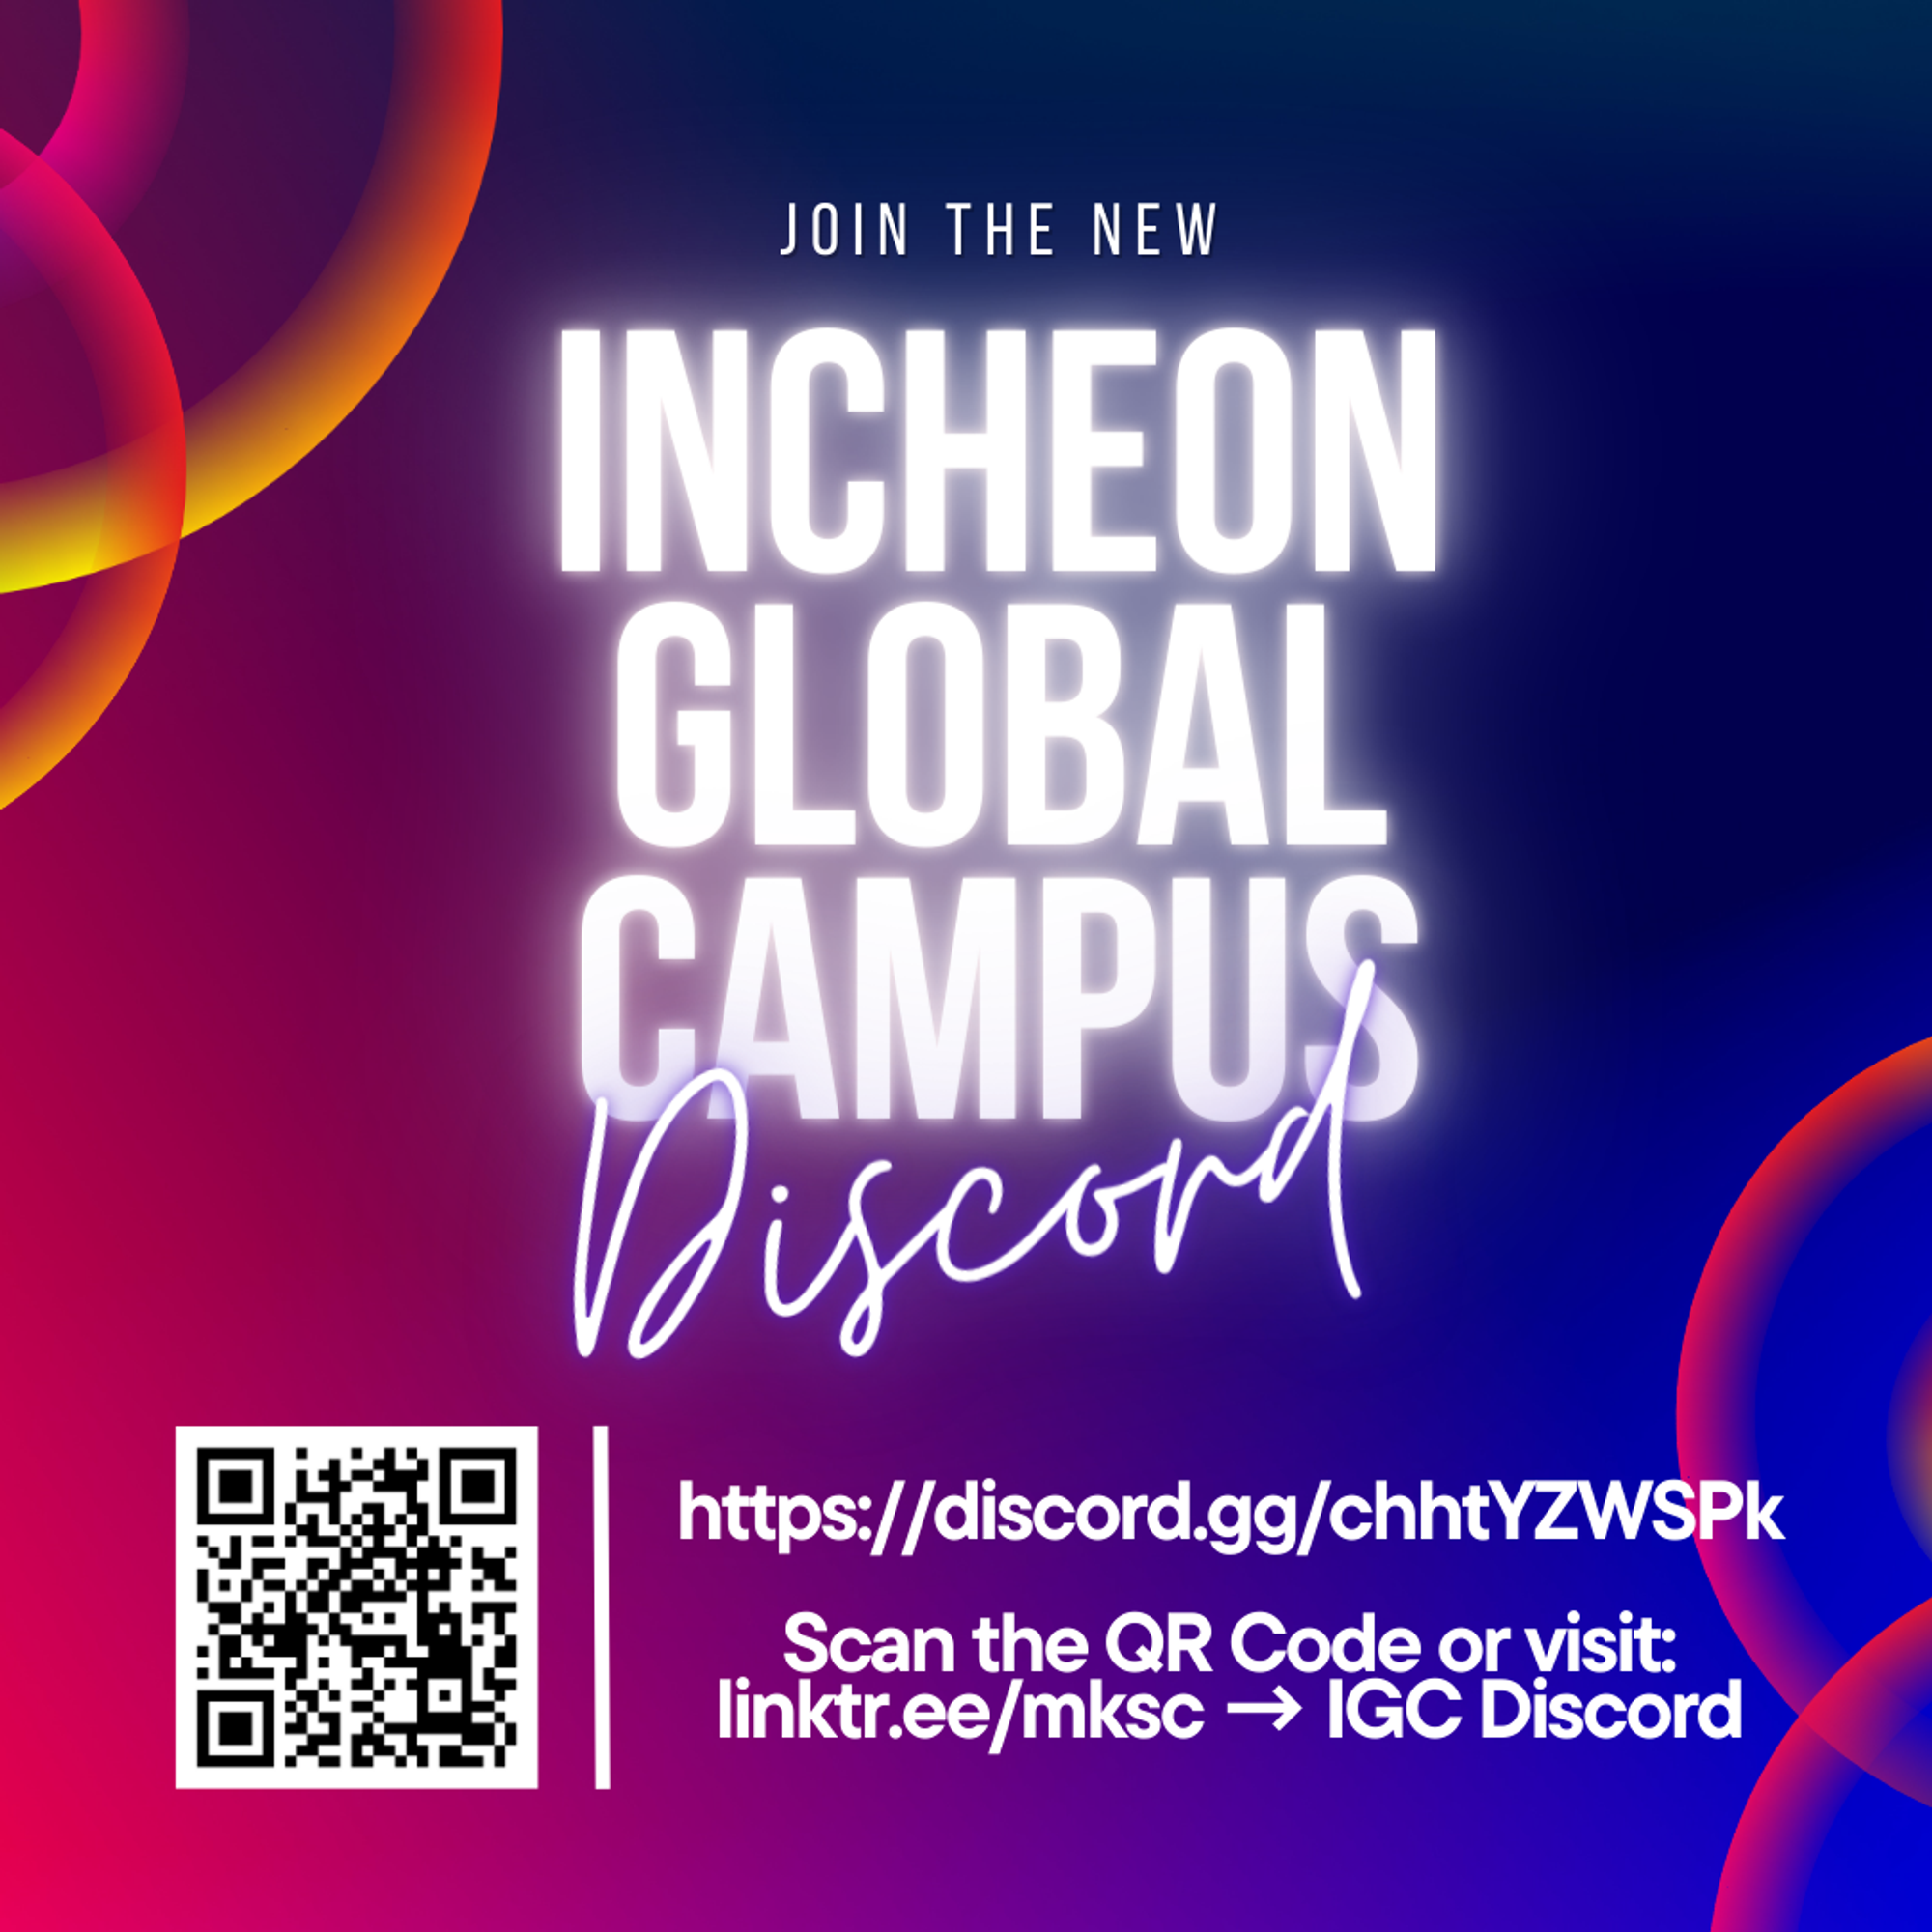 A New Incheon Global Campus Discord